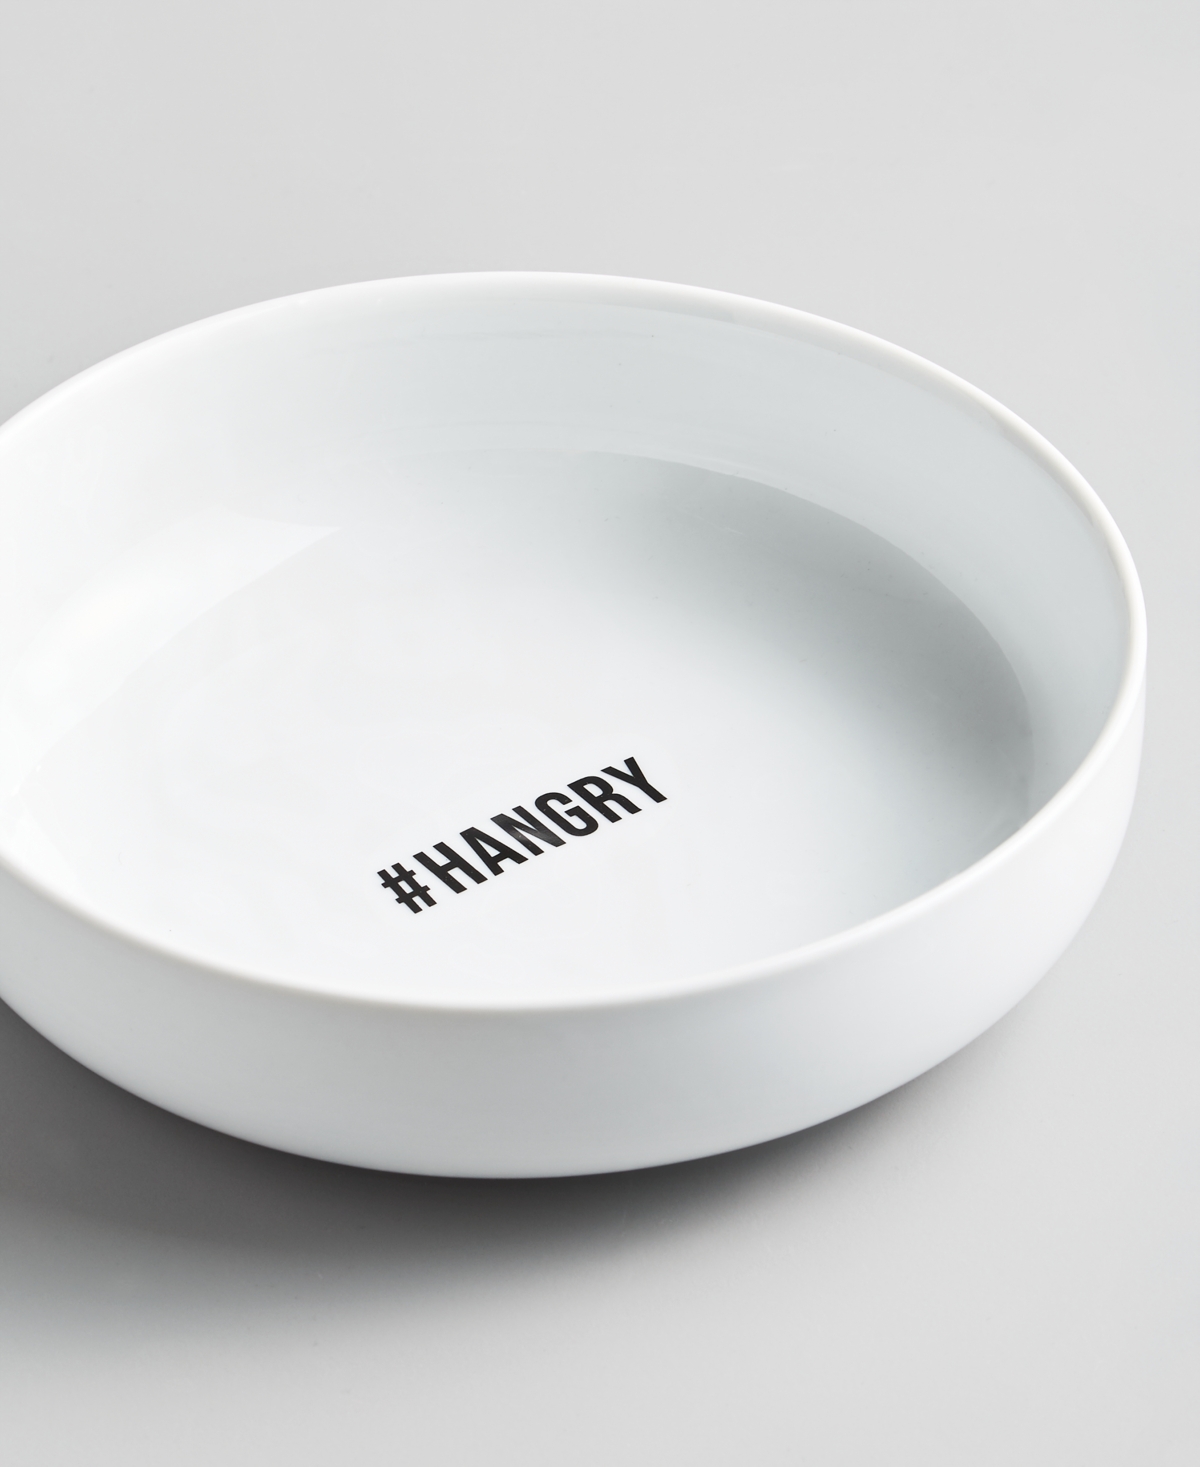 Hangry Dinner Bowl, Created for Macy's